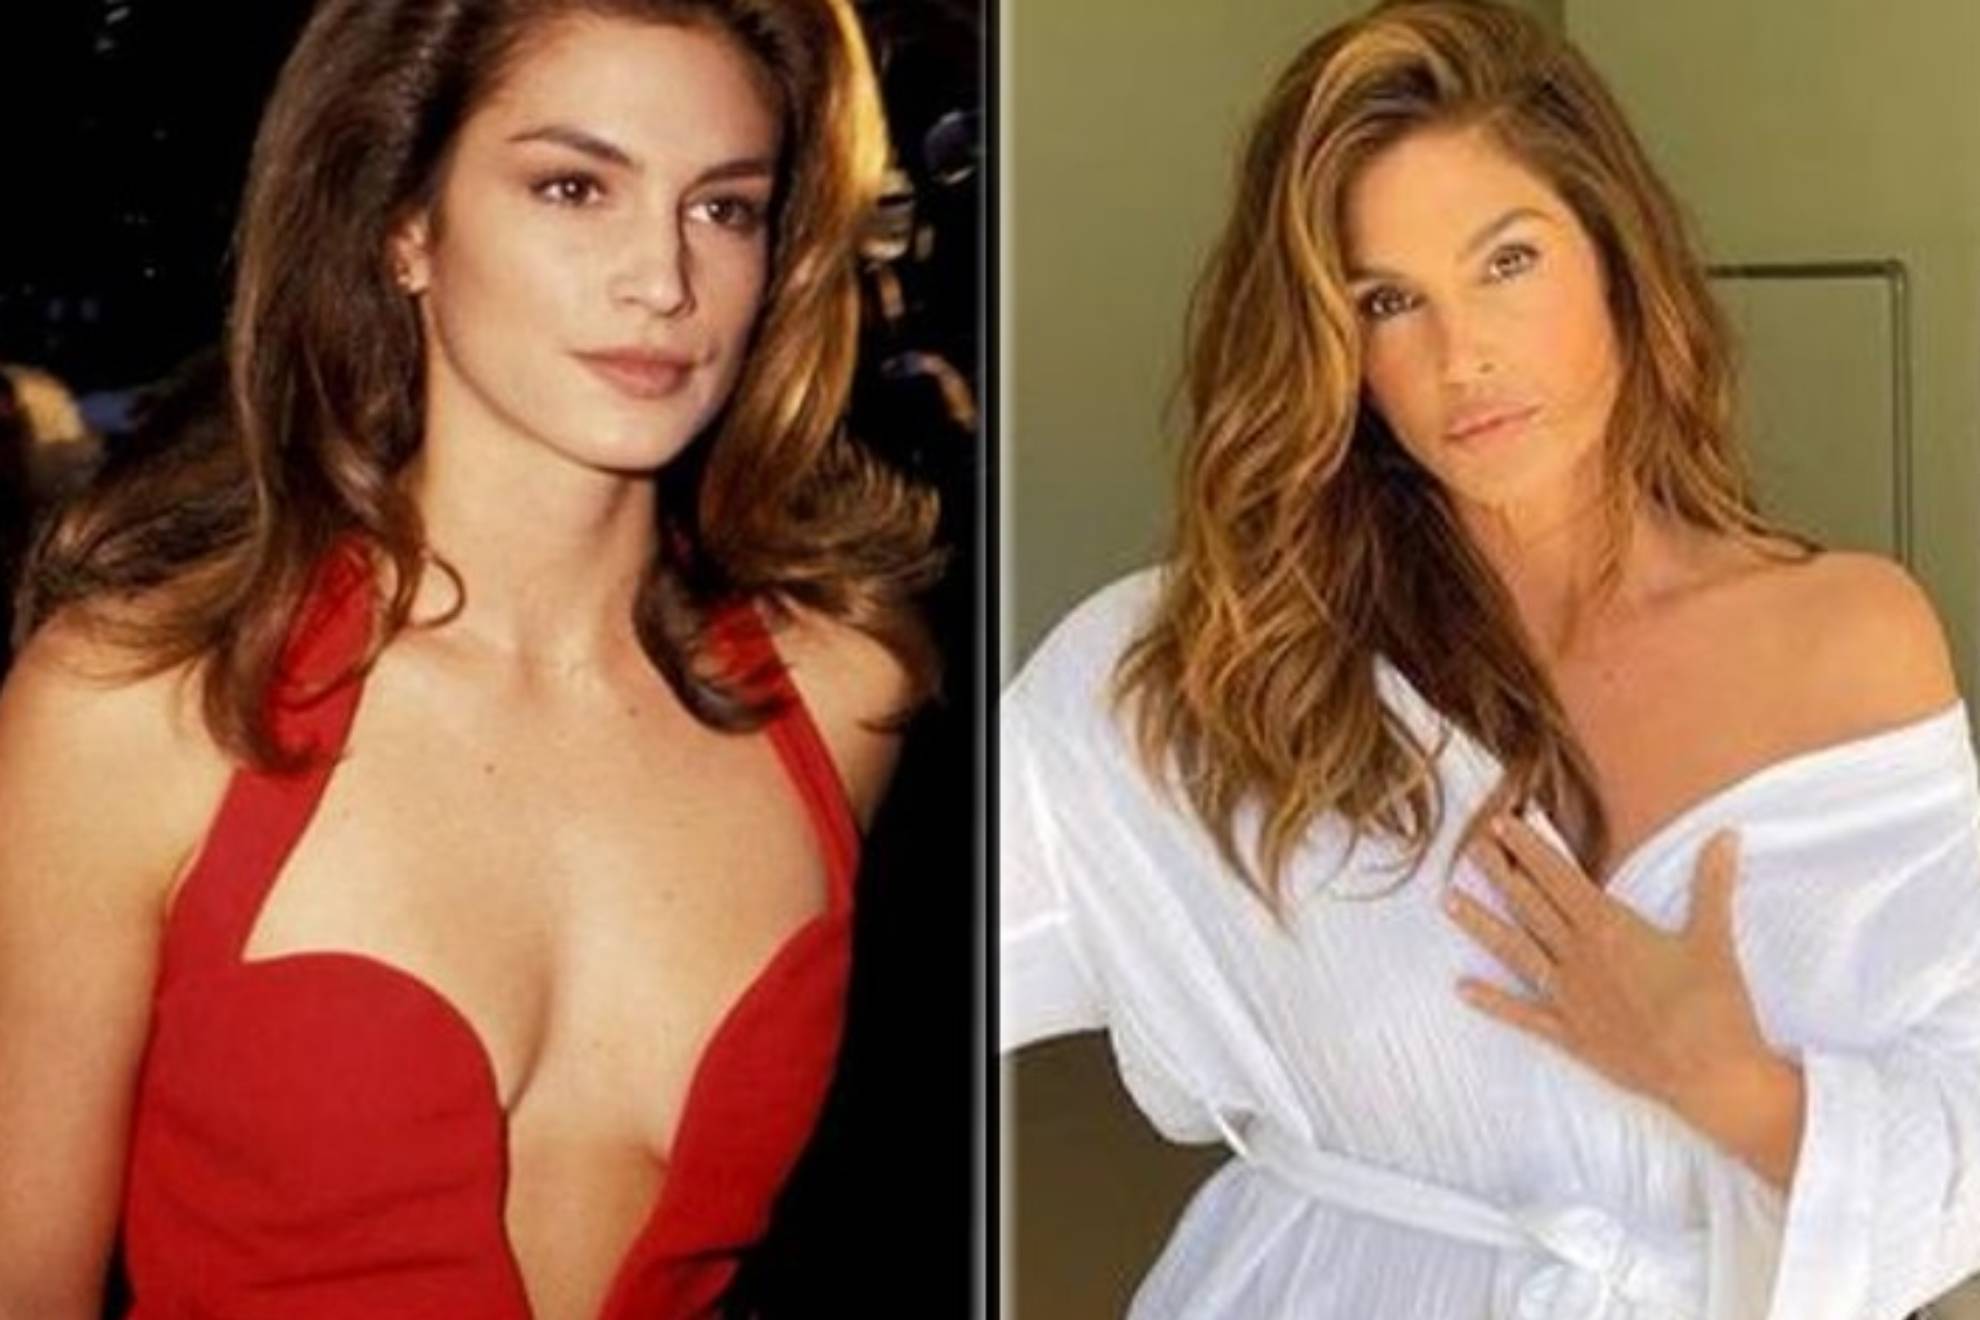 Cindy Crawford turns back time: the biggest supermodel of the 90s turns 58 years old